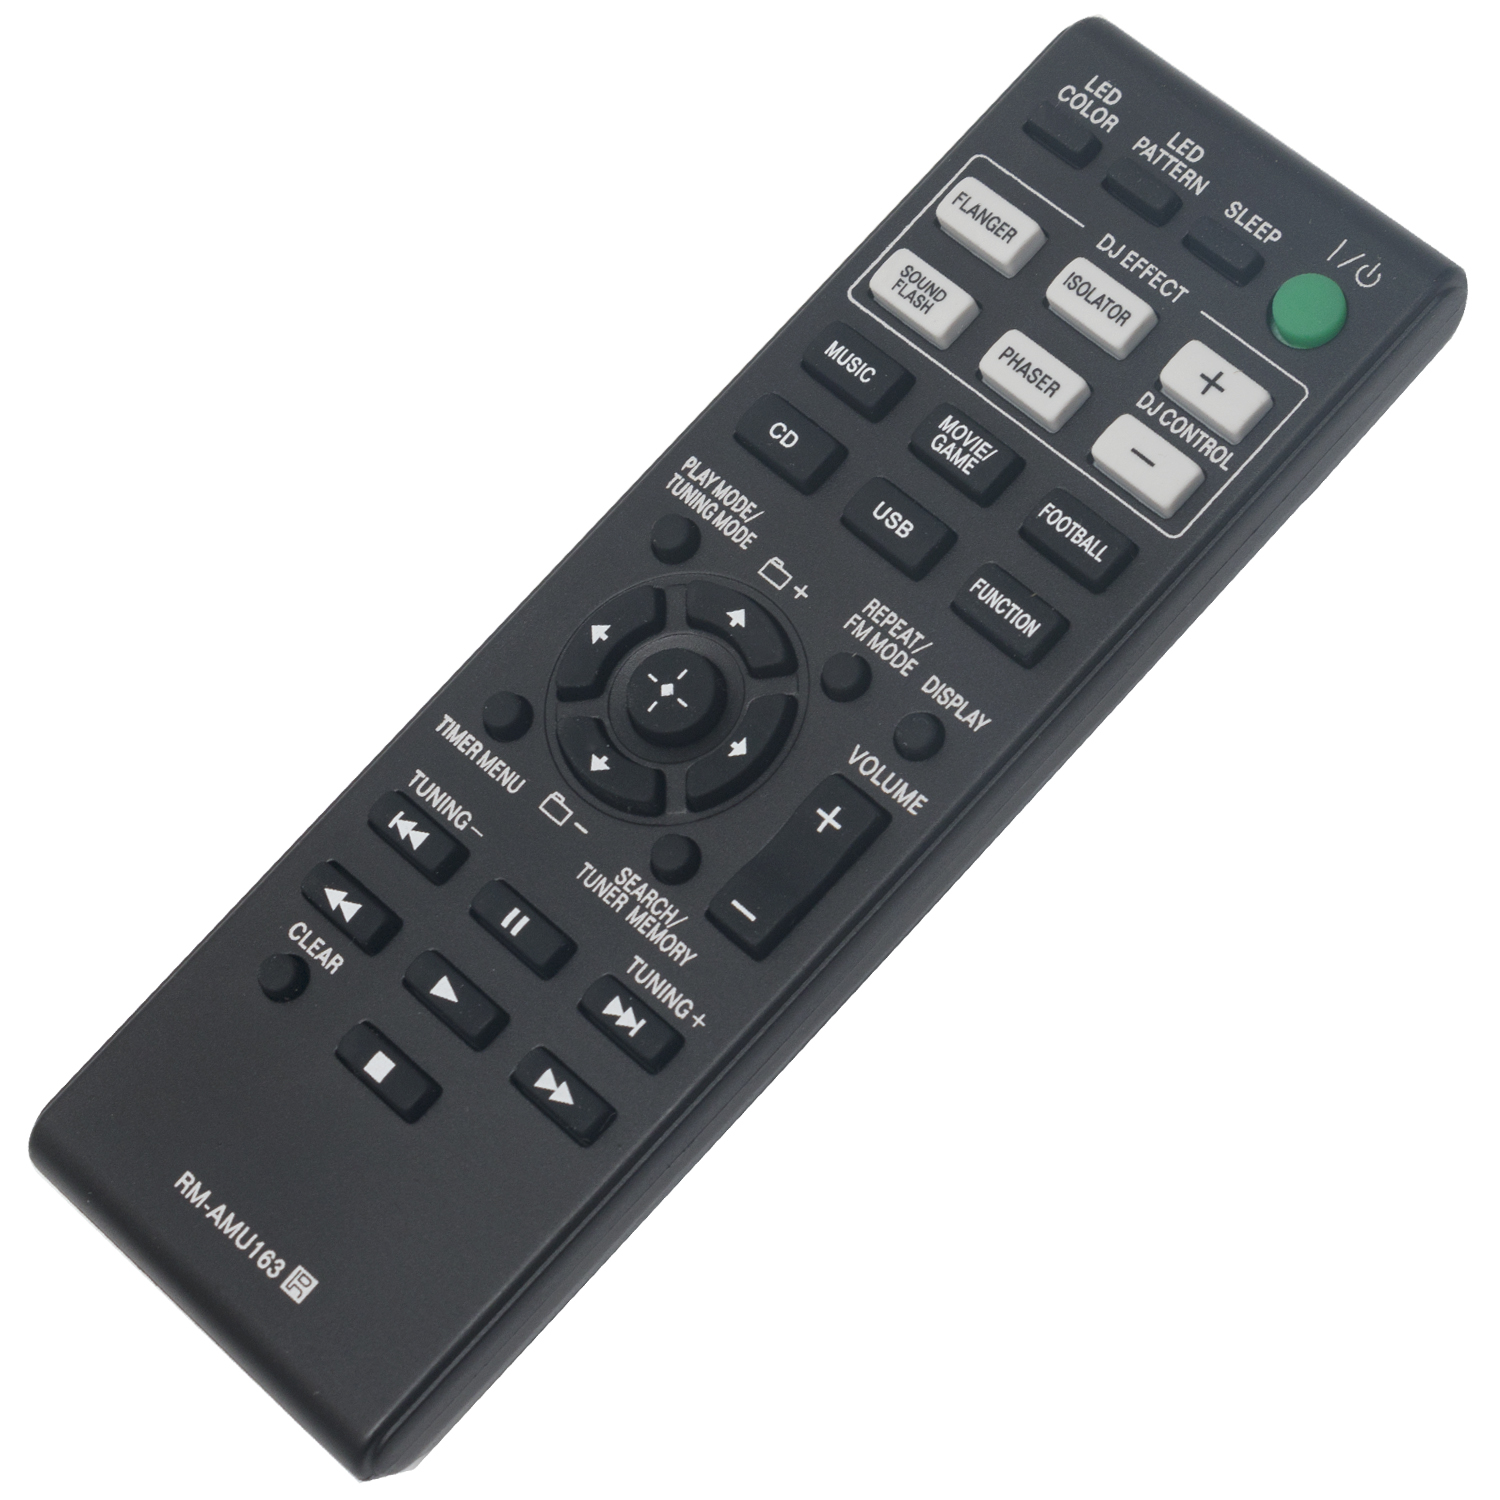 New RM-AMU163 Replaced Remote Control fit for Sony Mini HiFi Component System HCD-GPX55 LBT-GPX55 LBT-GPX77 SS-WGP55 SS-GPX55 - image 2 of 4